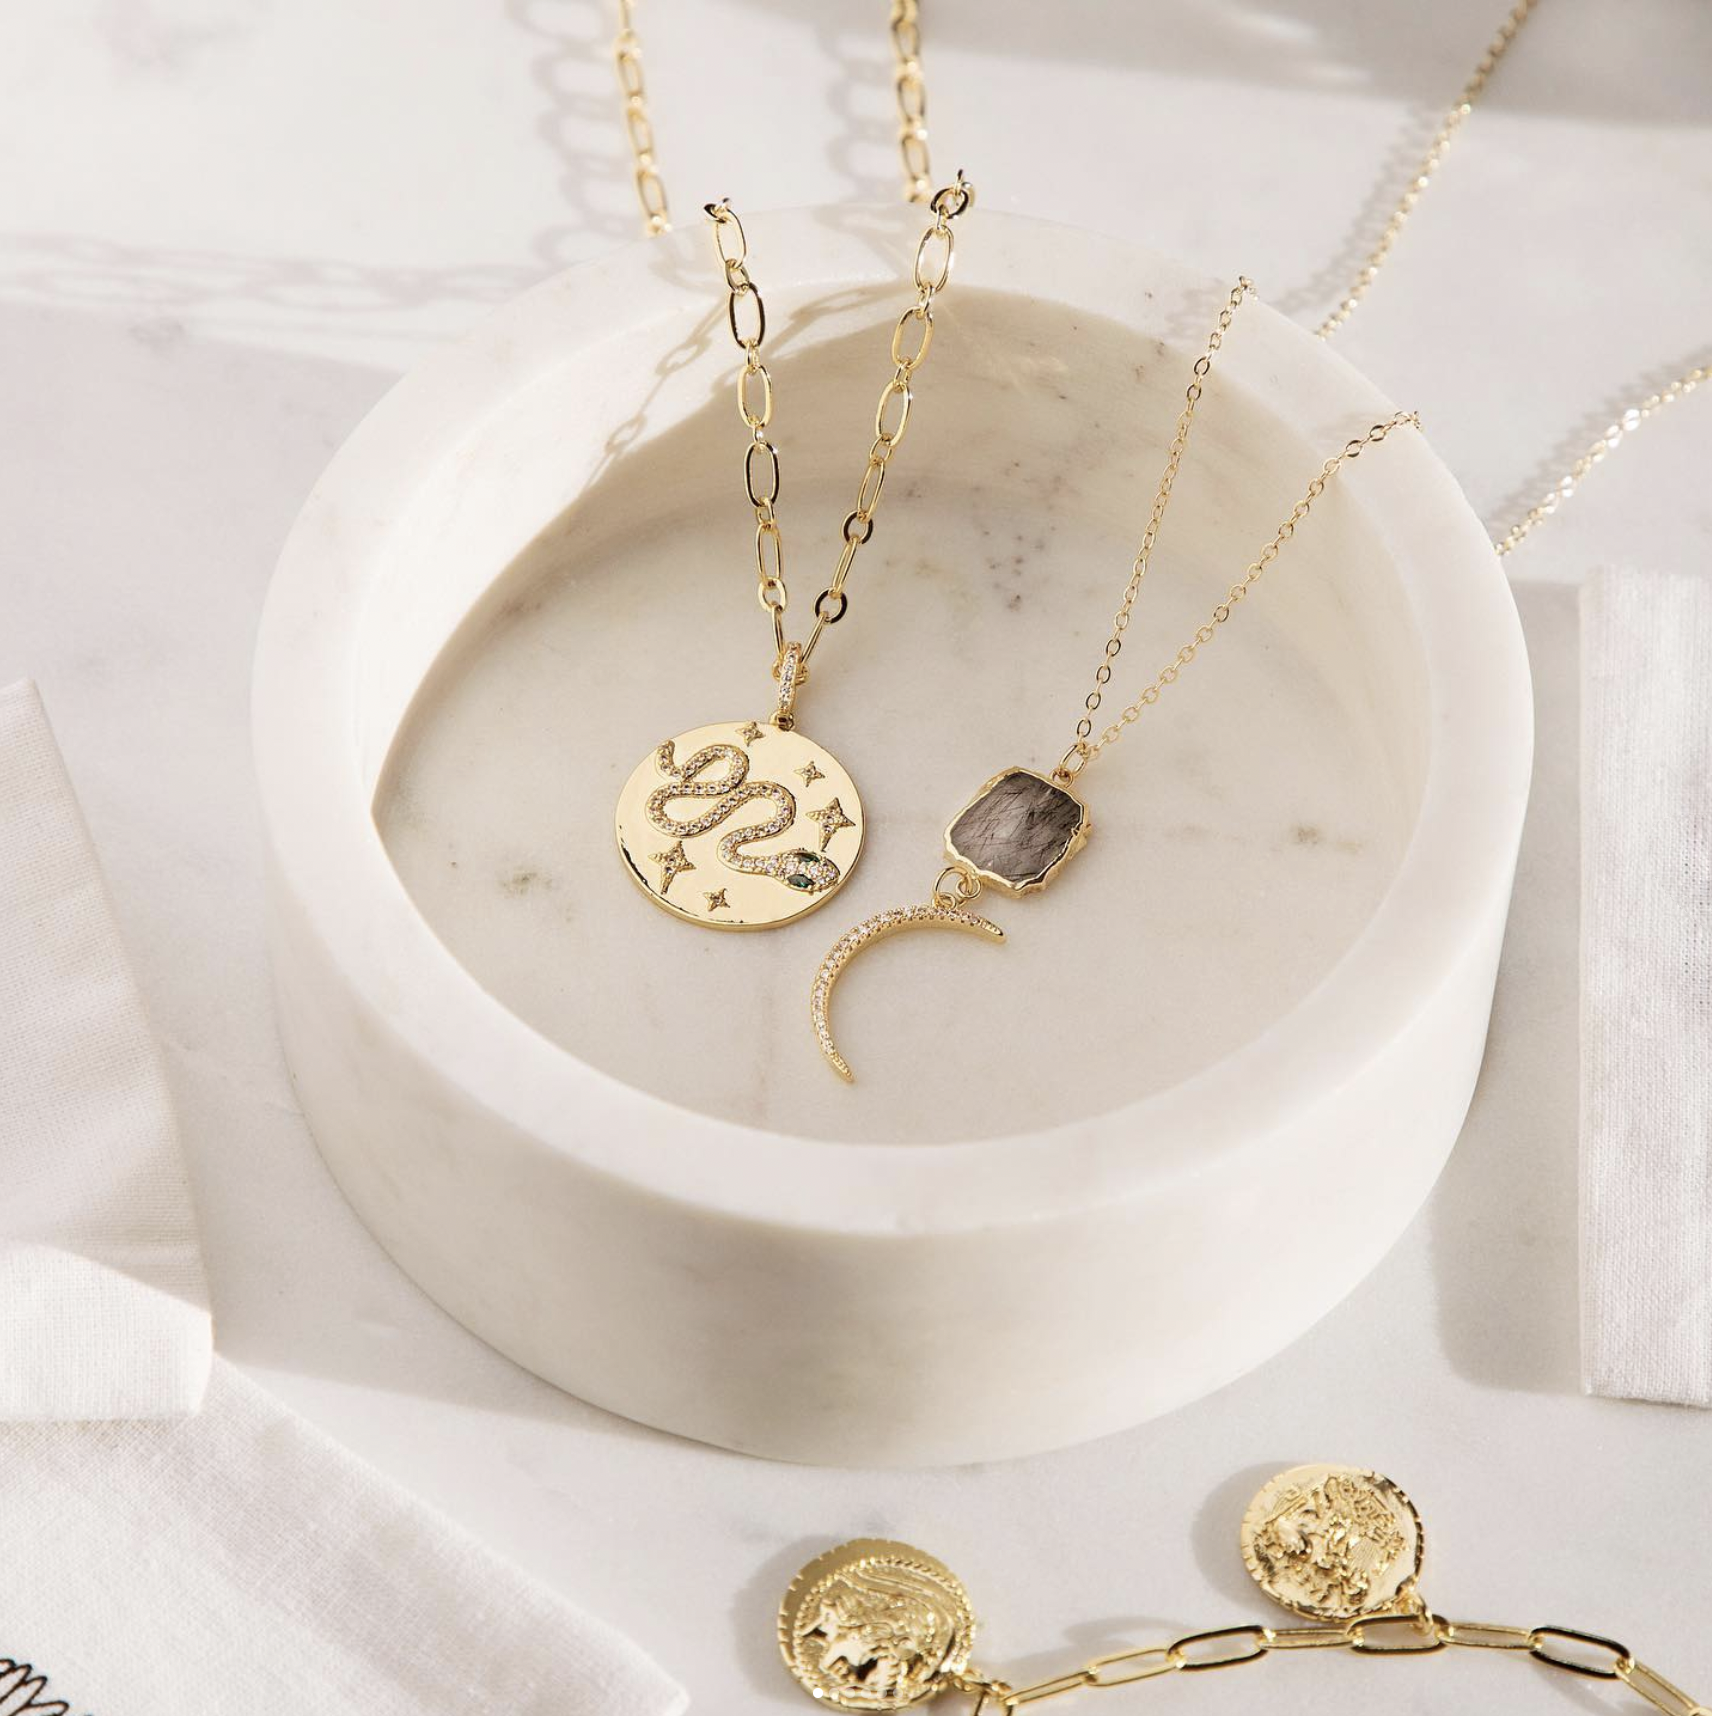 How To Photograph Necklaces, How To Photograph Jewellery, Necklaces, Marble Bowl, Gold Jewellery, Online Jewellery Photography Course, Online Jewelry Photography Course, Jewellery Photography Course, Jewelry Photography Course, How To Photograph Gold Jewellery